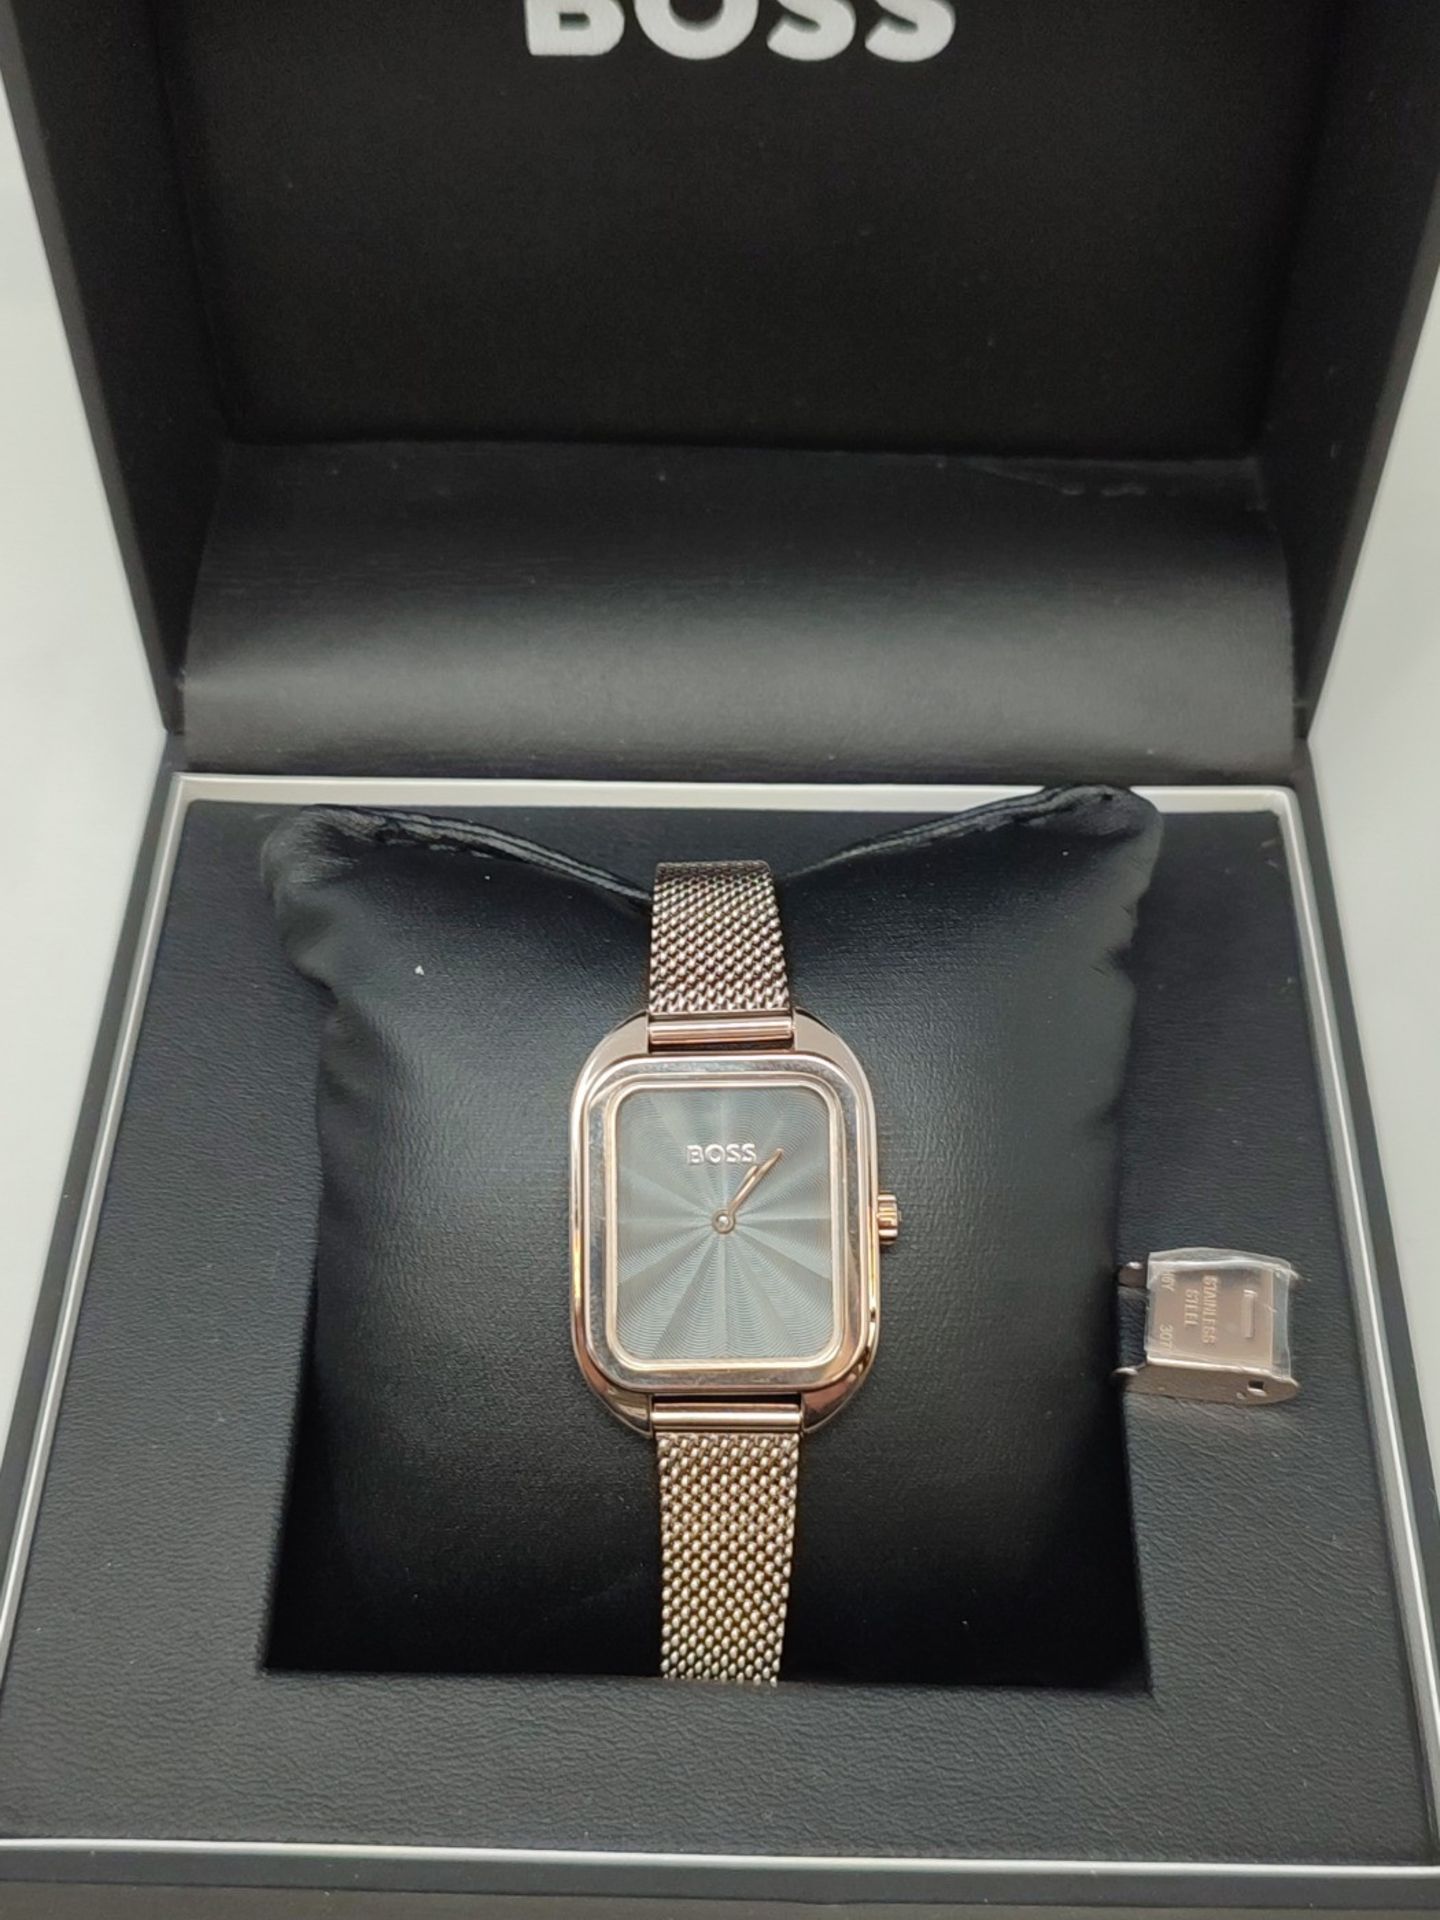 RRP £279.00 BOSS Analog quartz watch for women with rose gold stainless steel bracelet - 1502683 - Image 2 of 6